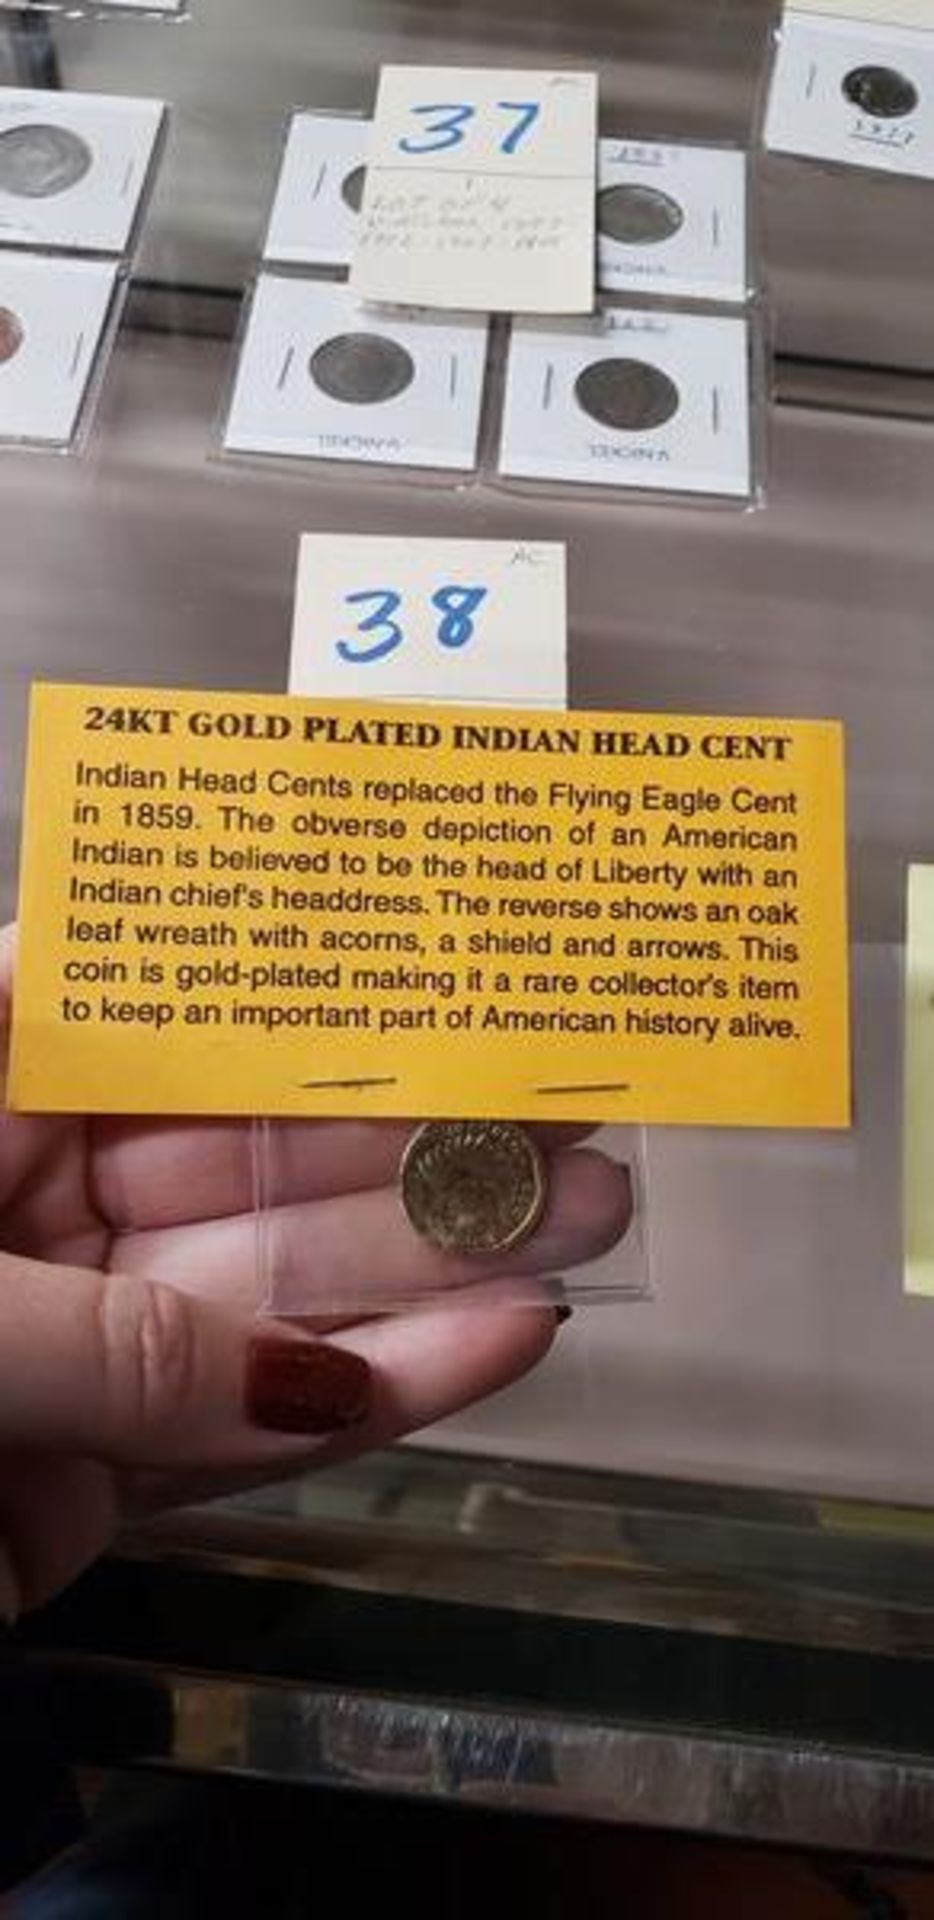 24KT GOLD PLATED INDIAN HEAD CENT